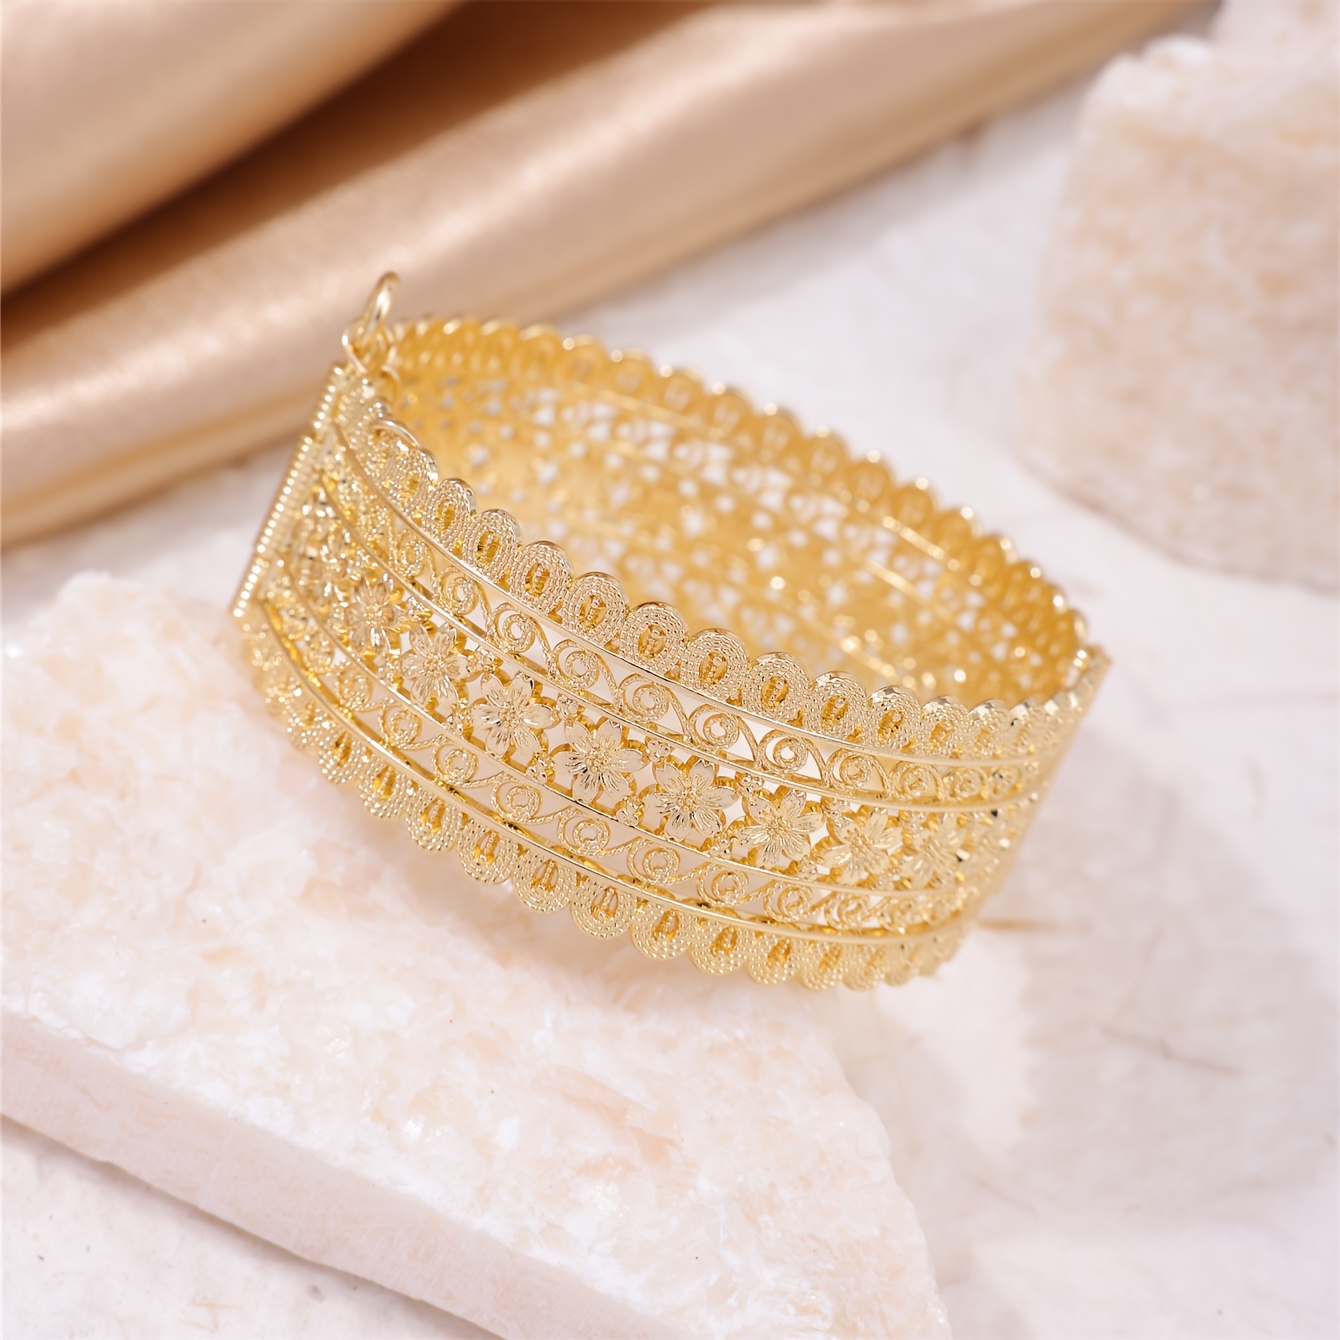 

Elegant Vintage Arabian Style Open Bangle With Floral Engravings - Perfect For Weddings And Celebrations - 22k Gold Plated Zinc Alloy